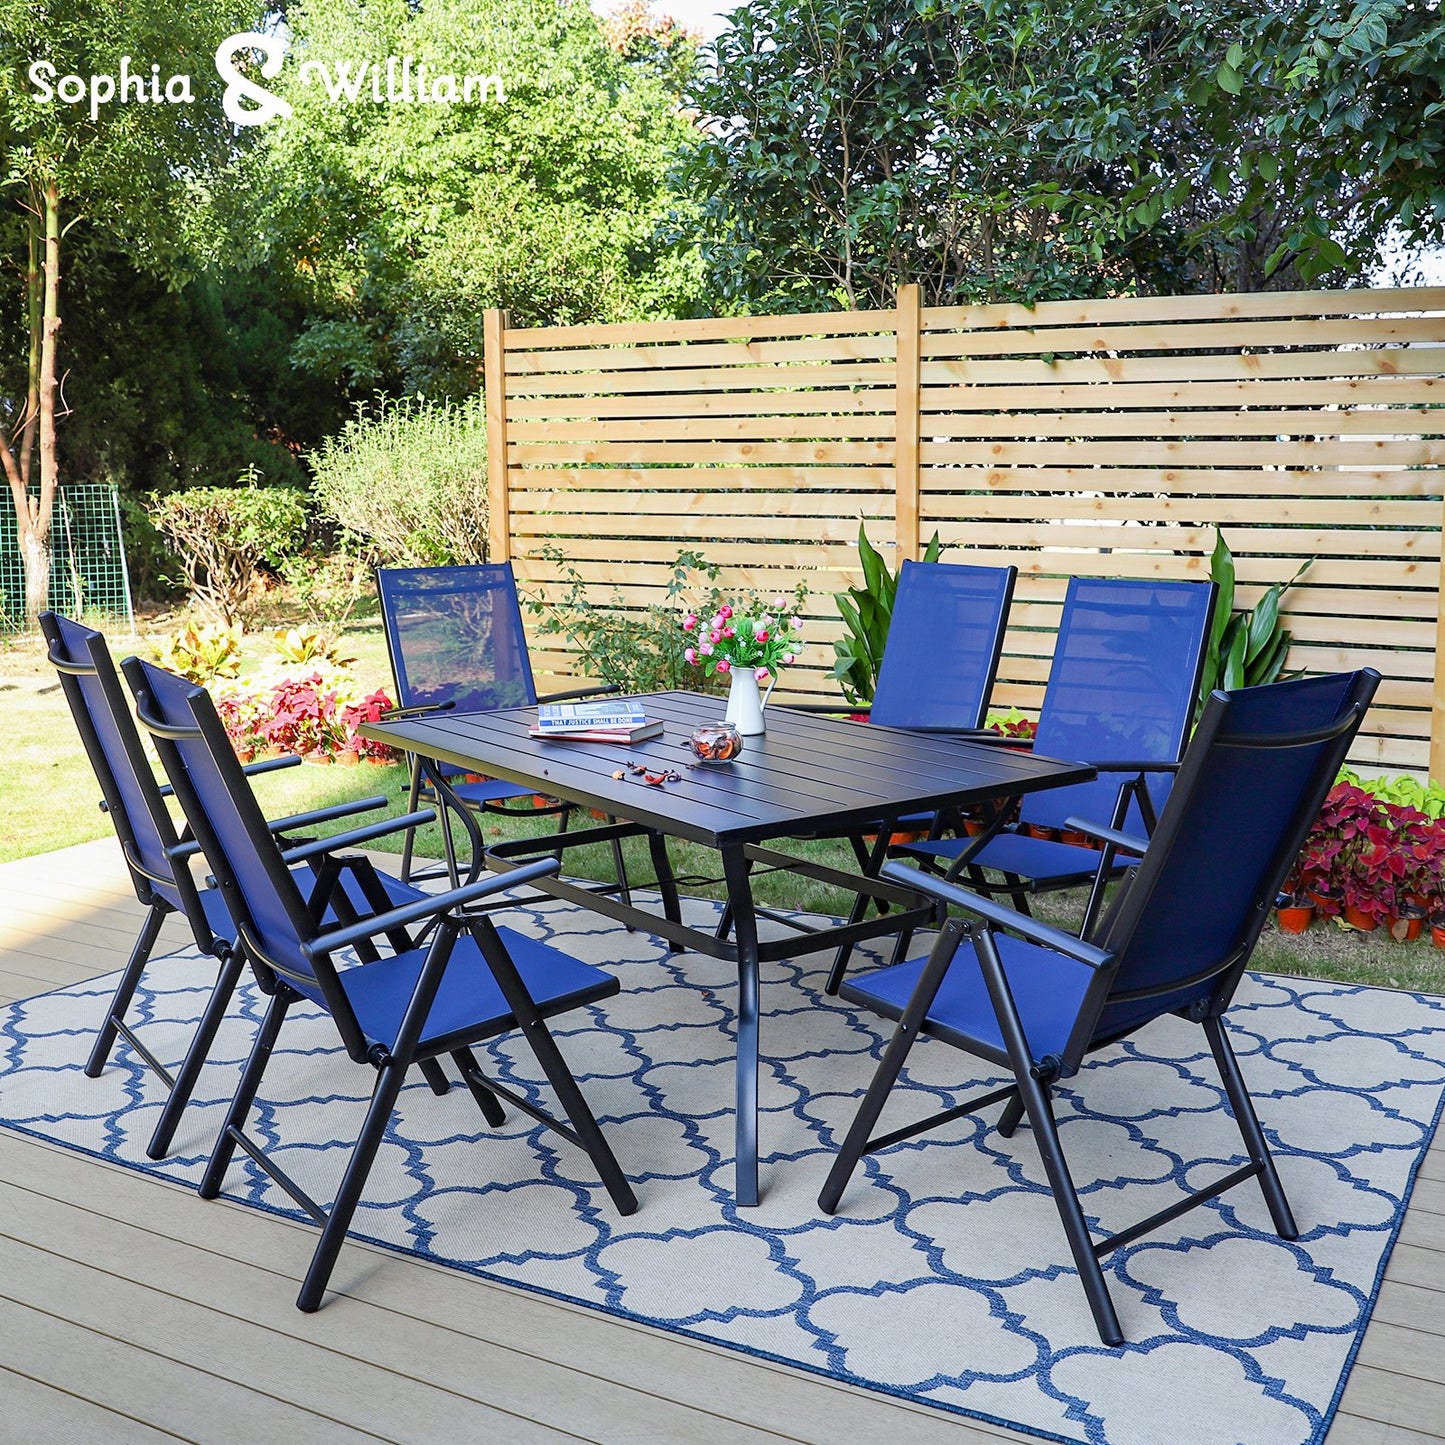 Sophia&William 7Pcs Patio Dining Set Metal Table and Chairs Set for 6 People - Blue